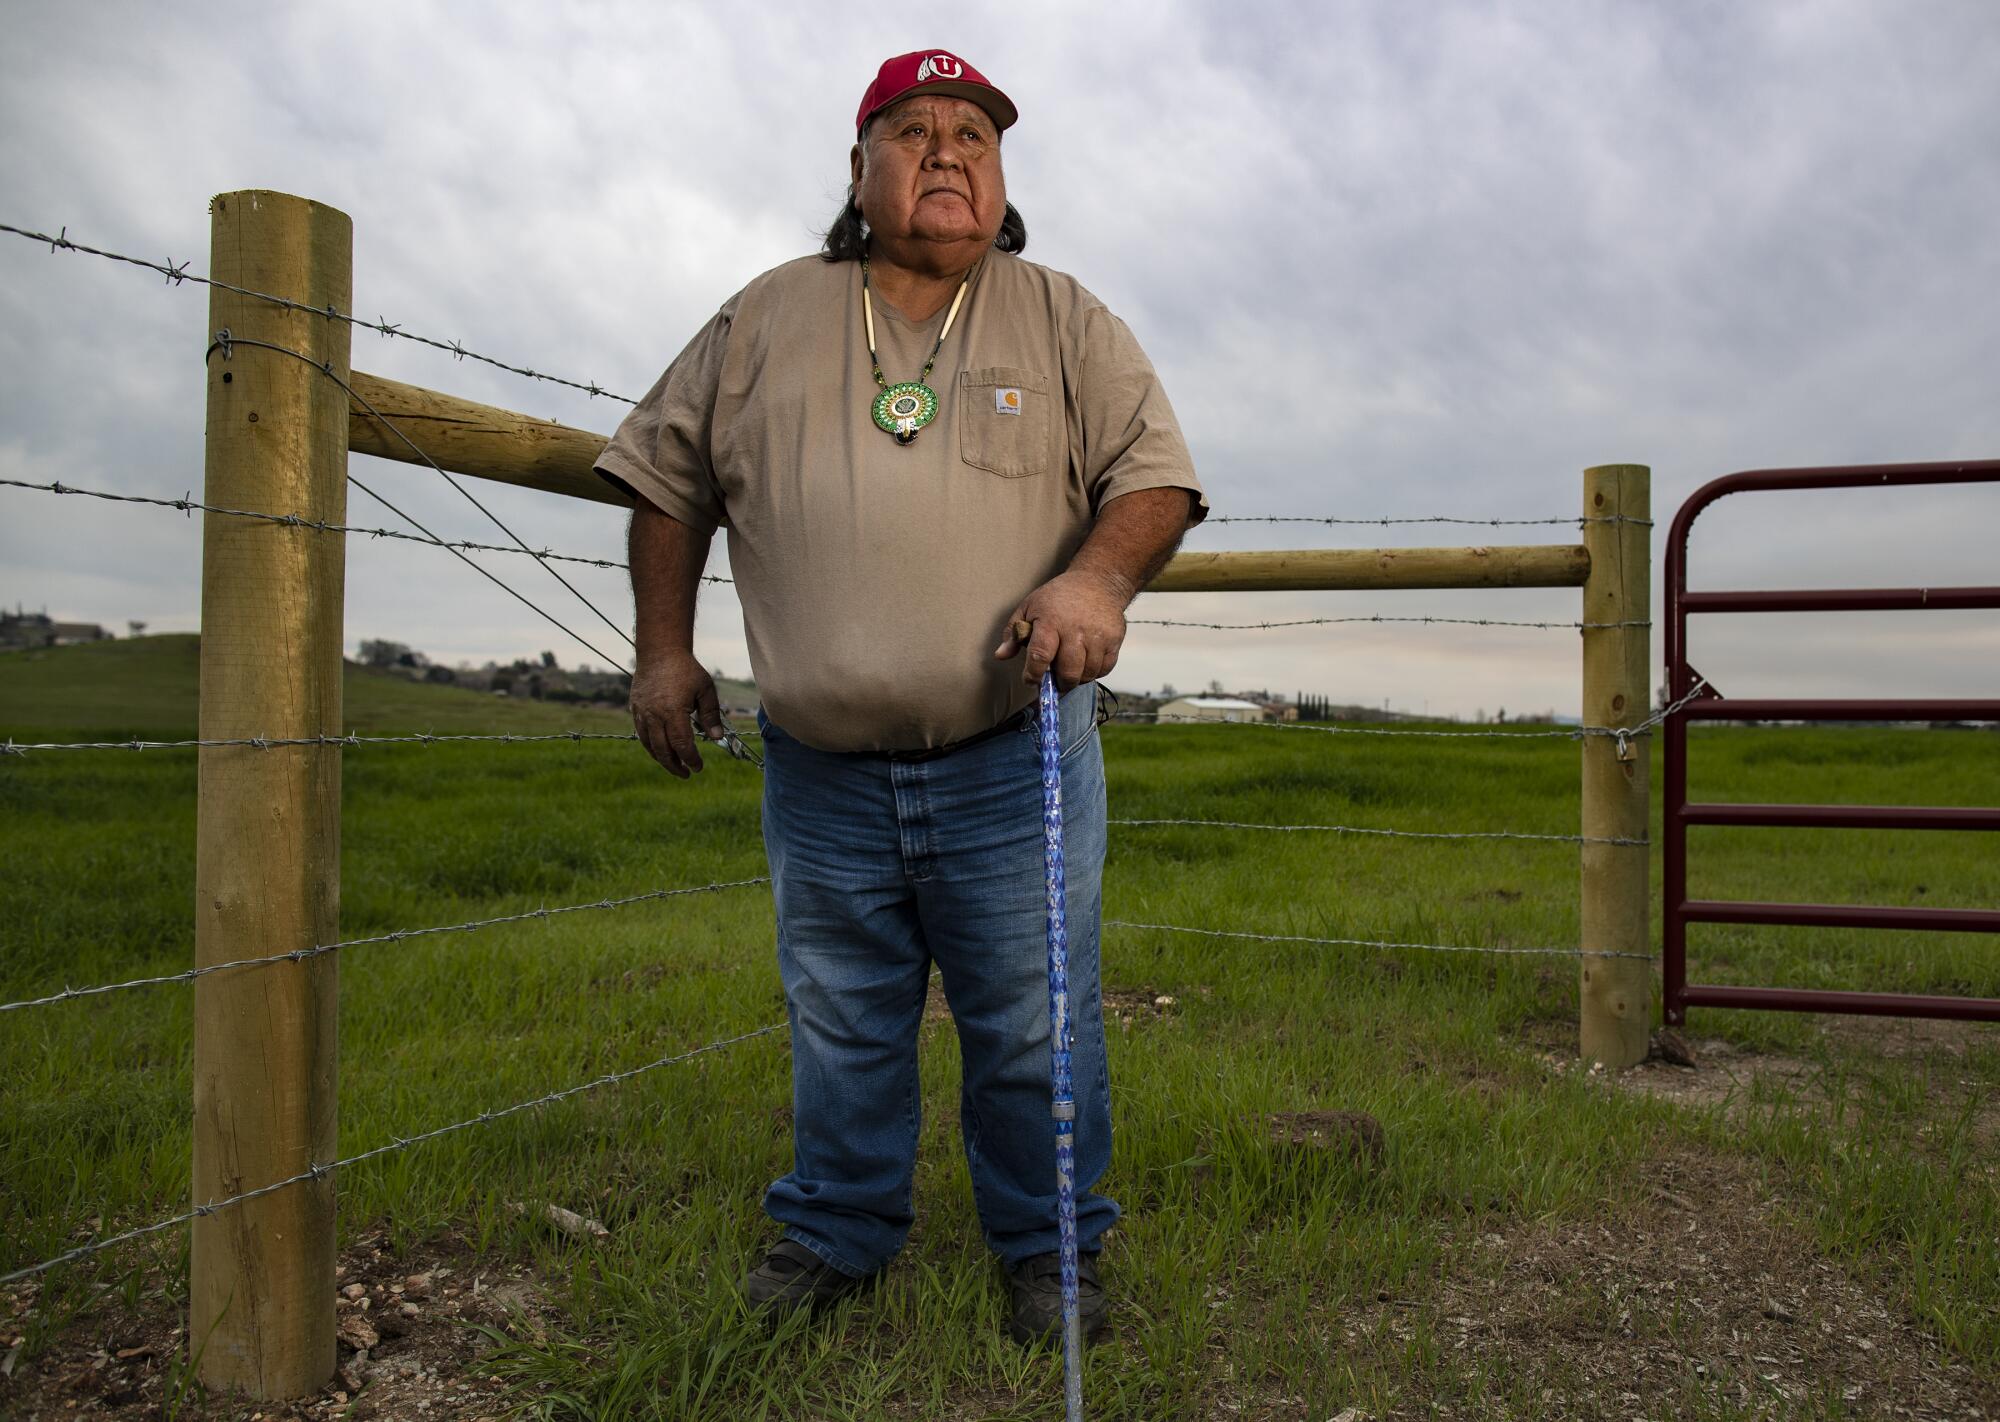 A man in a beaded pendant and red baseball cap, holding a cane and standing by a gate and barbed-wire fence in a grassy field